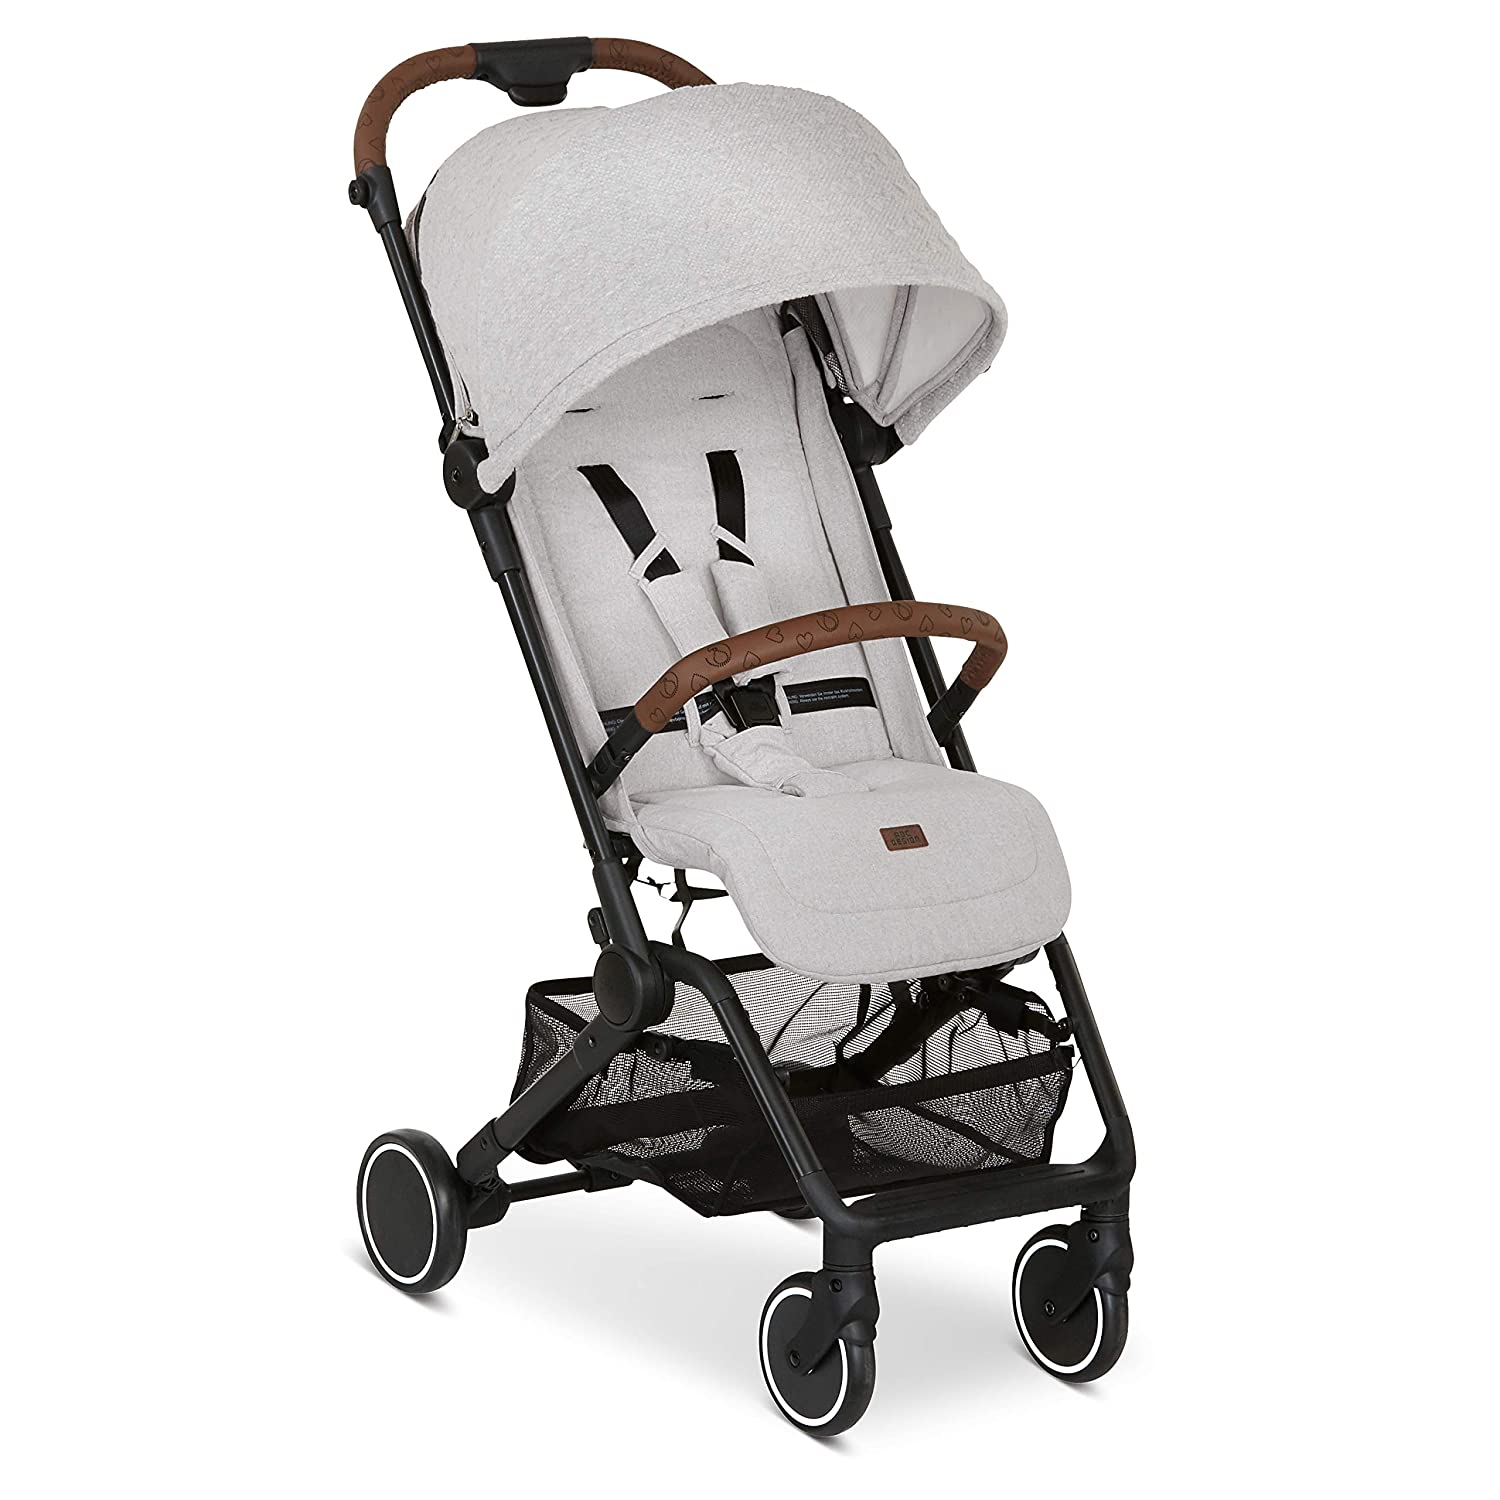 ABC Design Ping Fashion Edition Travel Buggy - Sports Car Ideal for Holidays - Reclining Position - Compact Folding Size with Transport Safety - From Birth to 15 kg - Colour: Melon